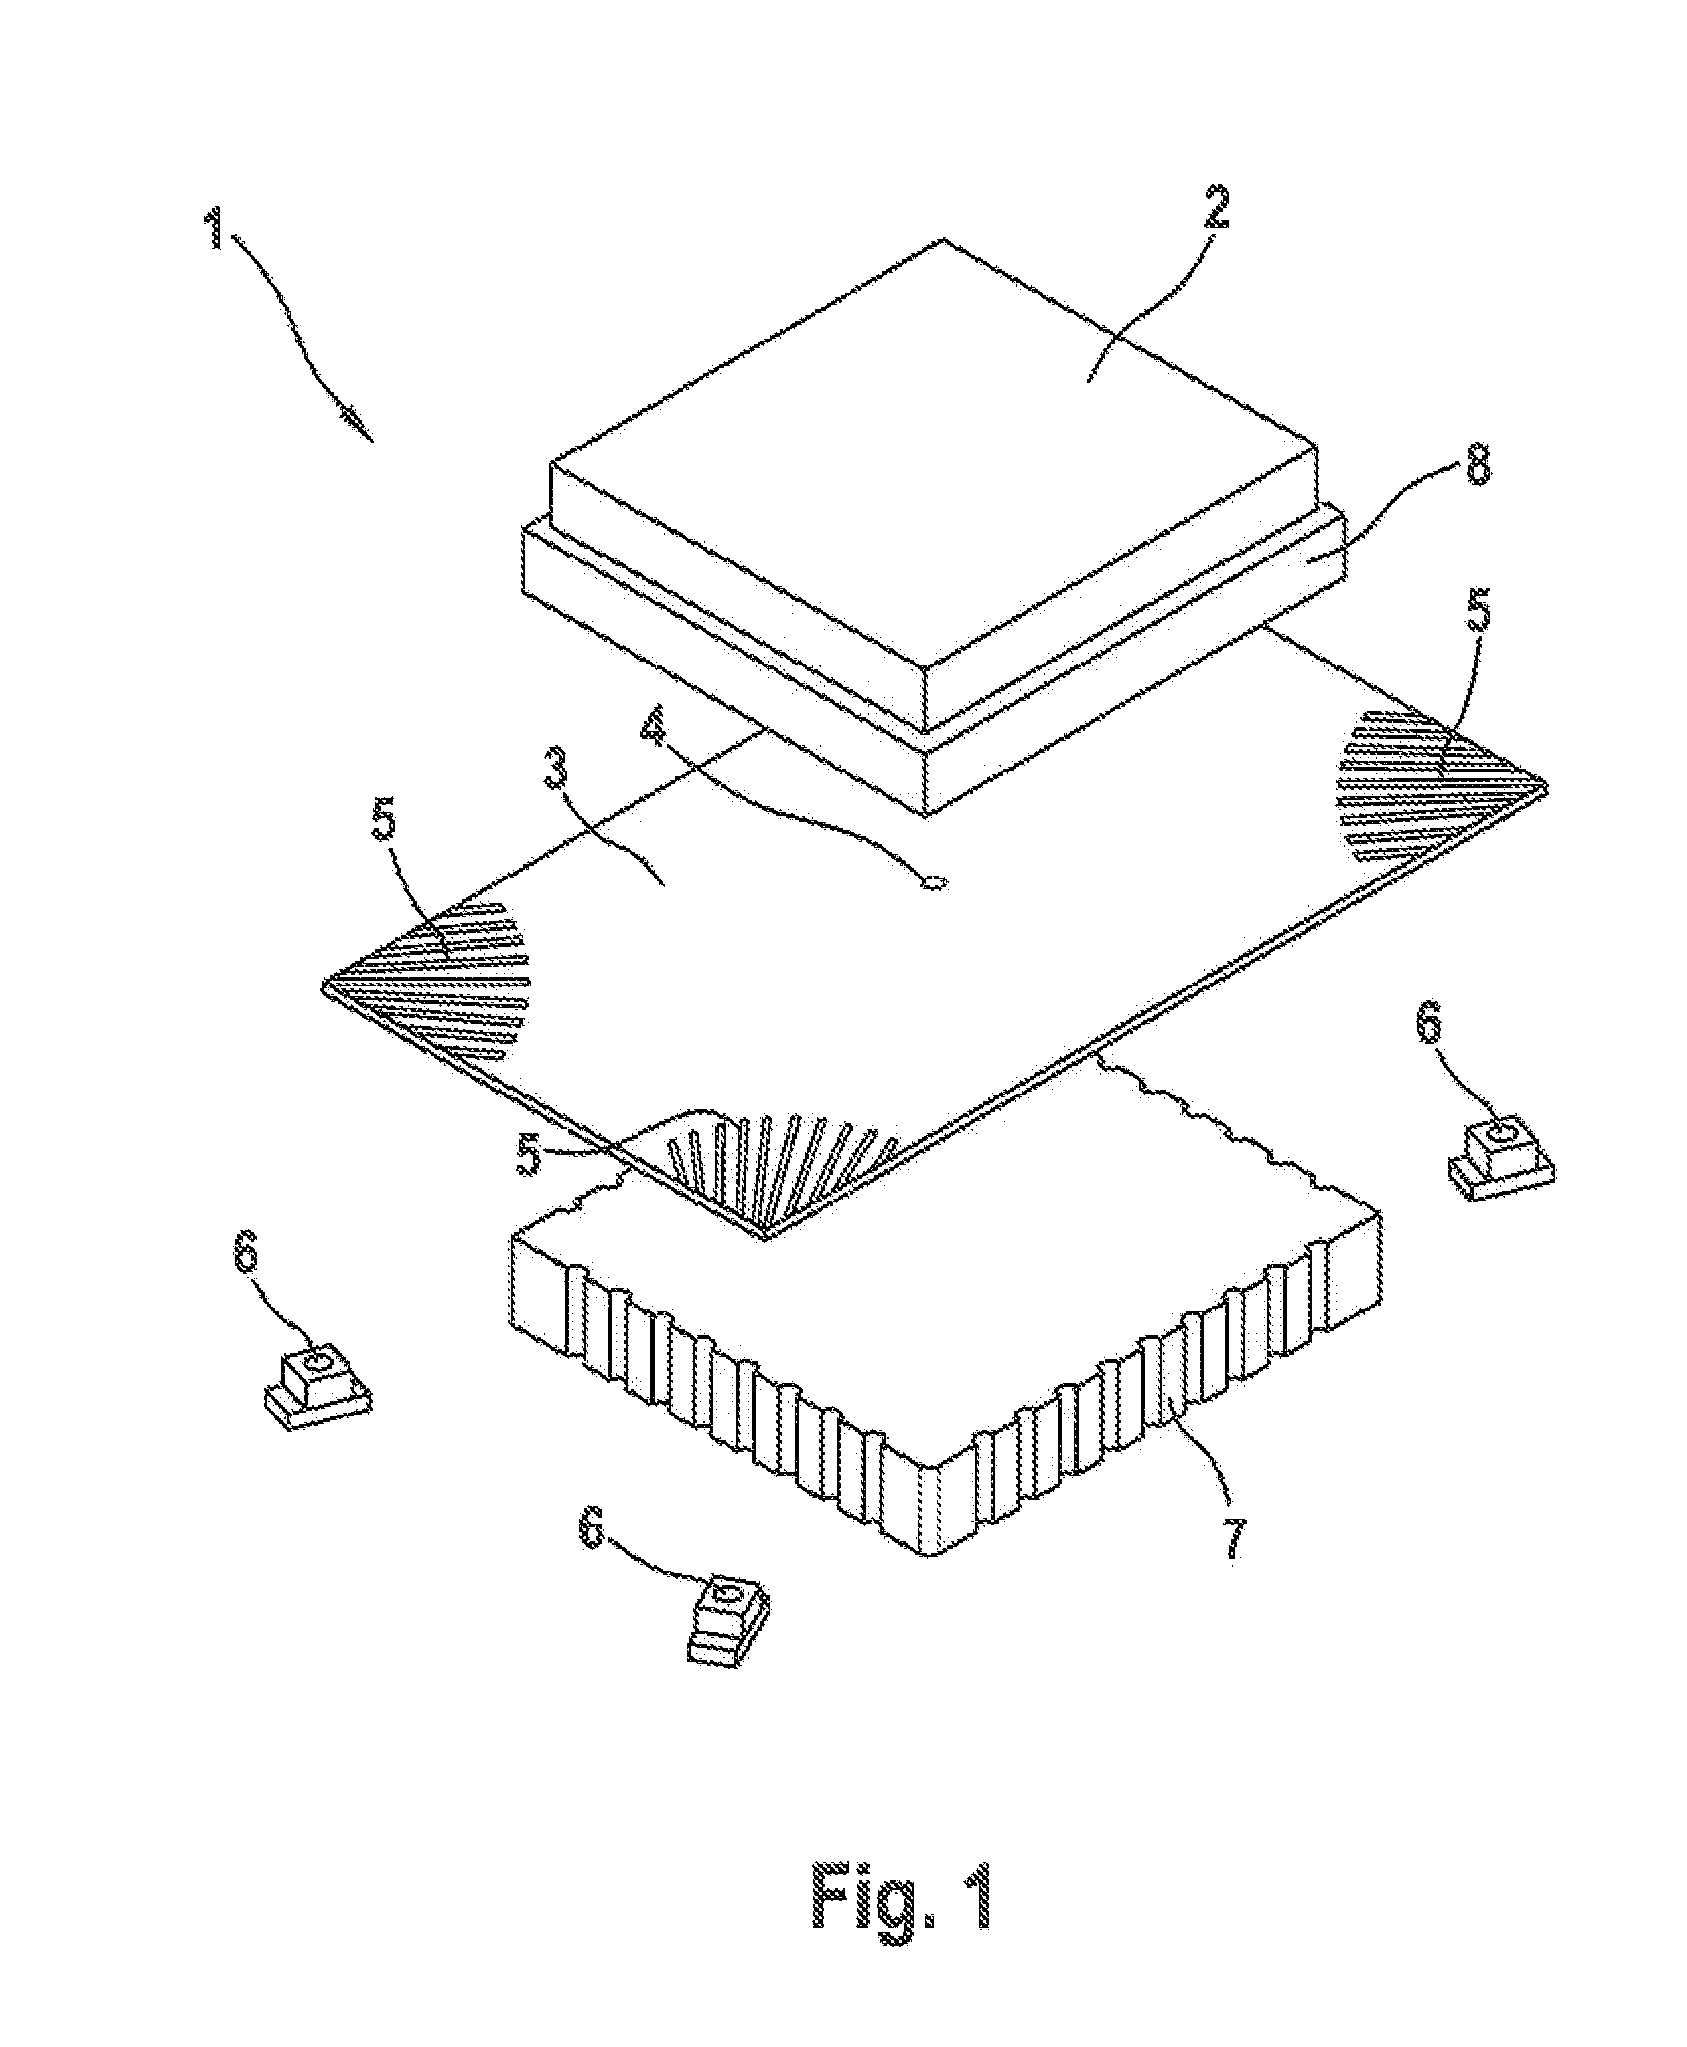 System and method for optically imaging objects on a detection device by a pinhole aperture